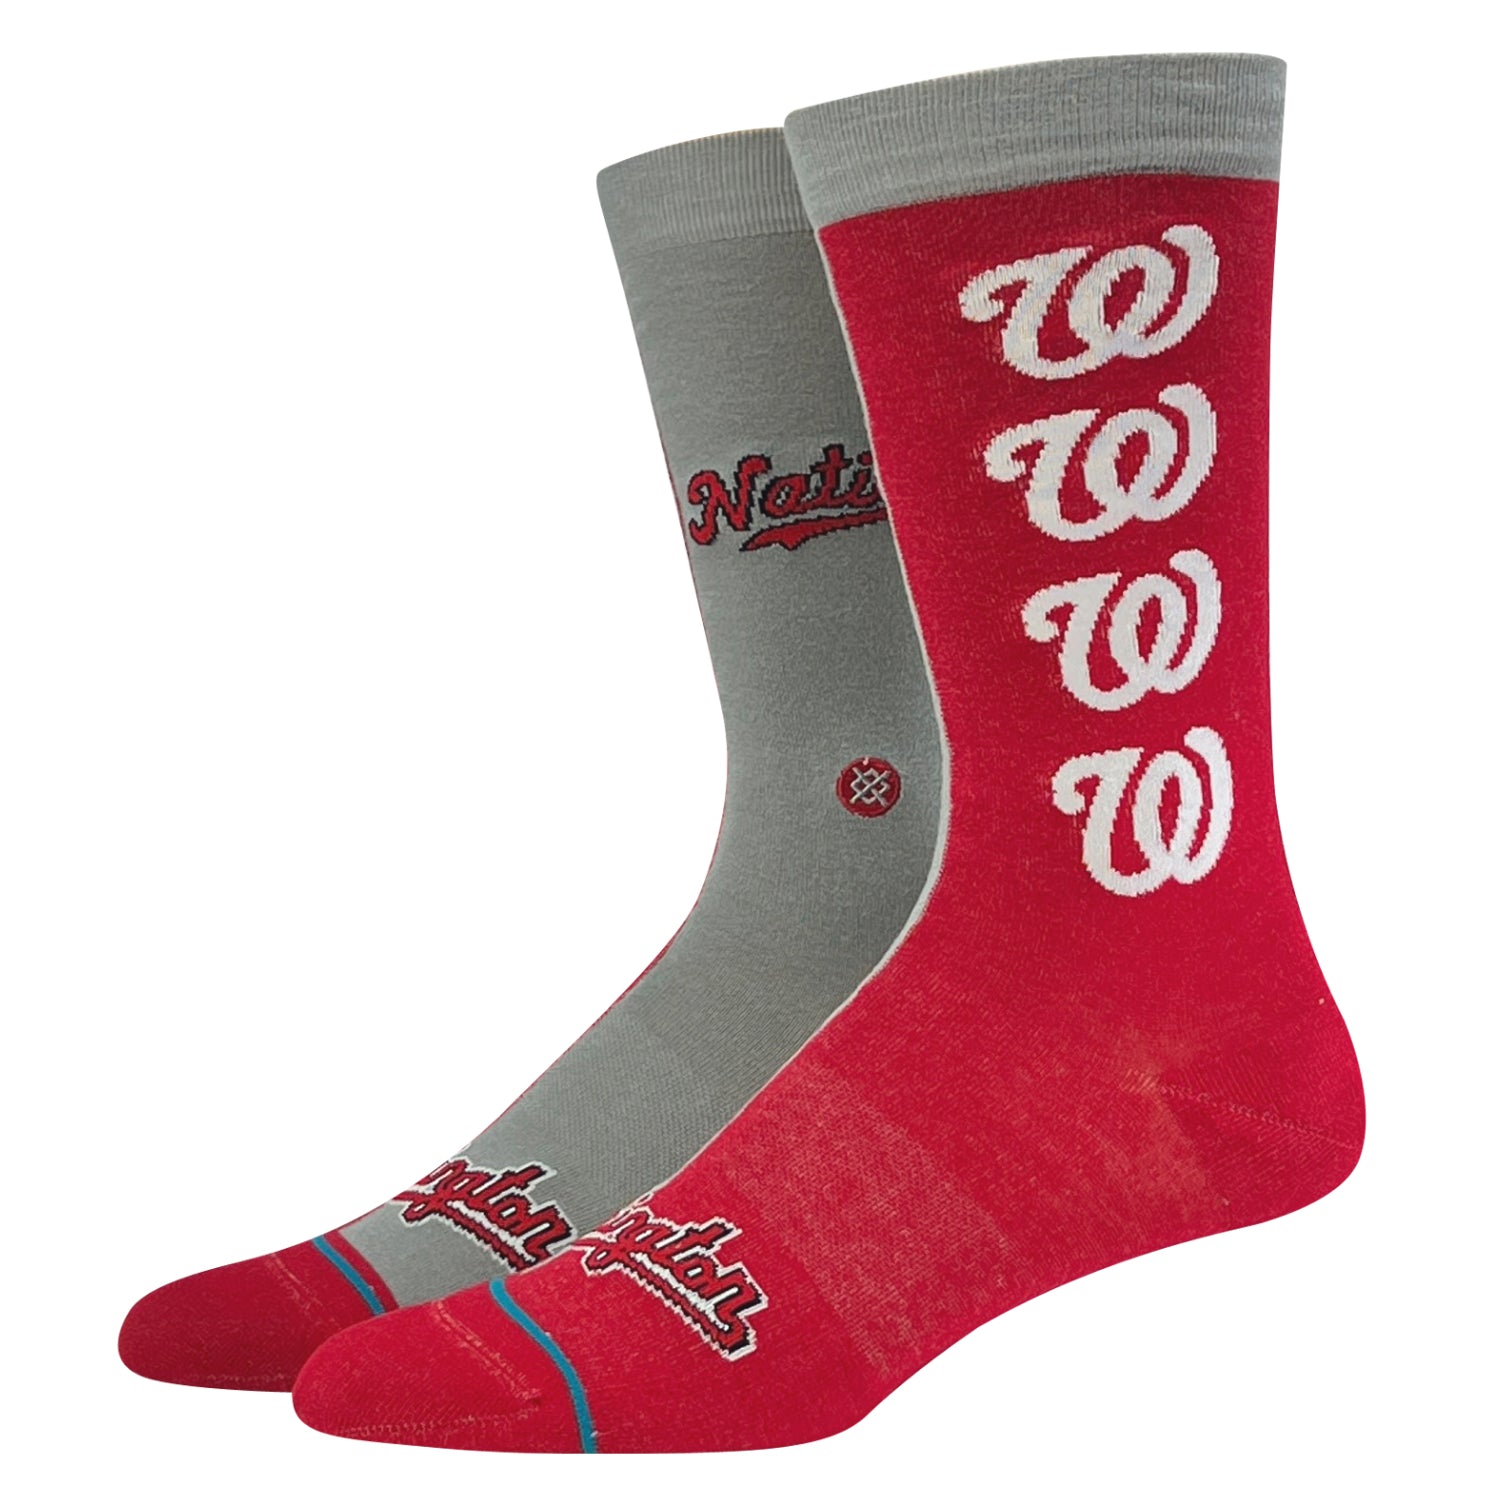 MLB Stance 2022 Armed Forces Day Over the Calf Socks - Camo